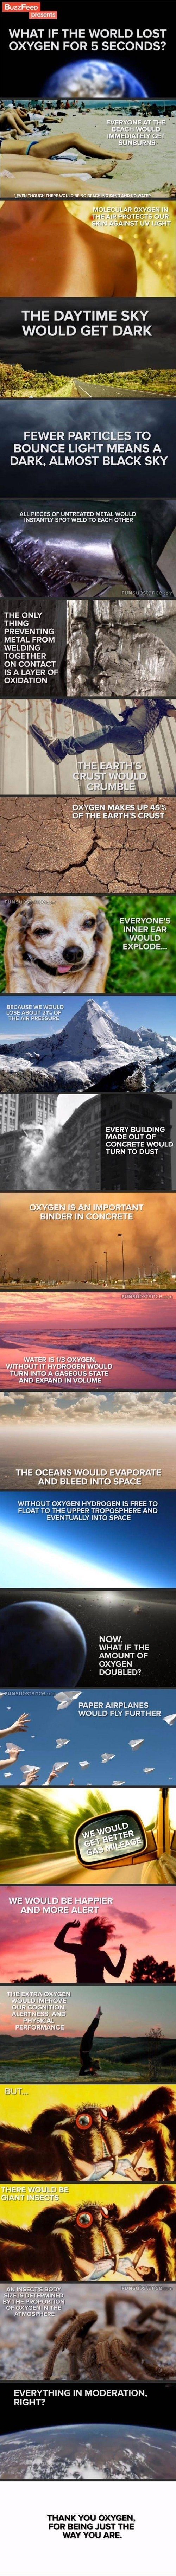 The importance of oxygen